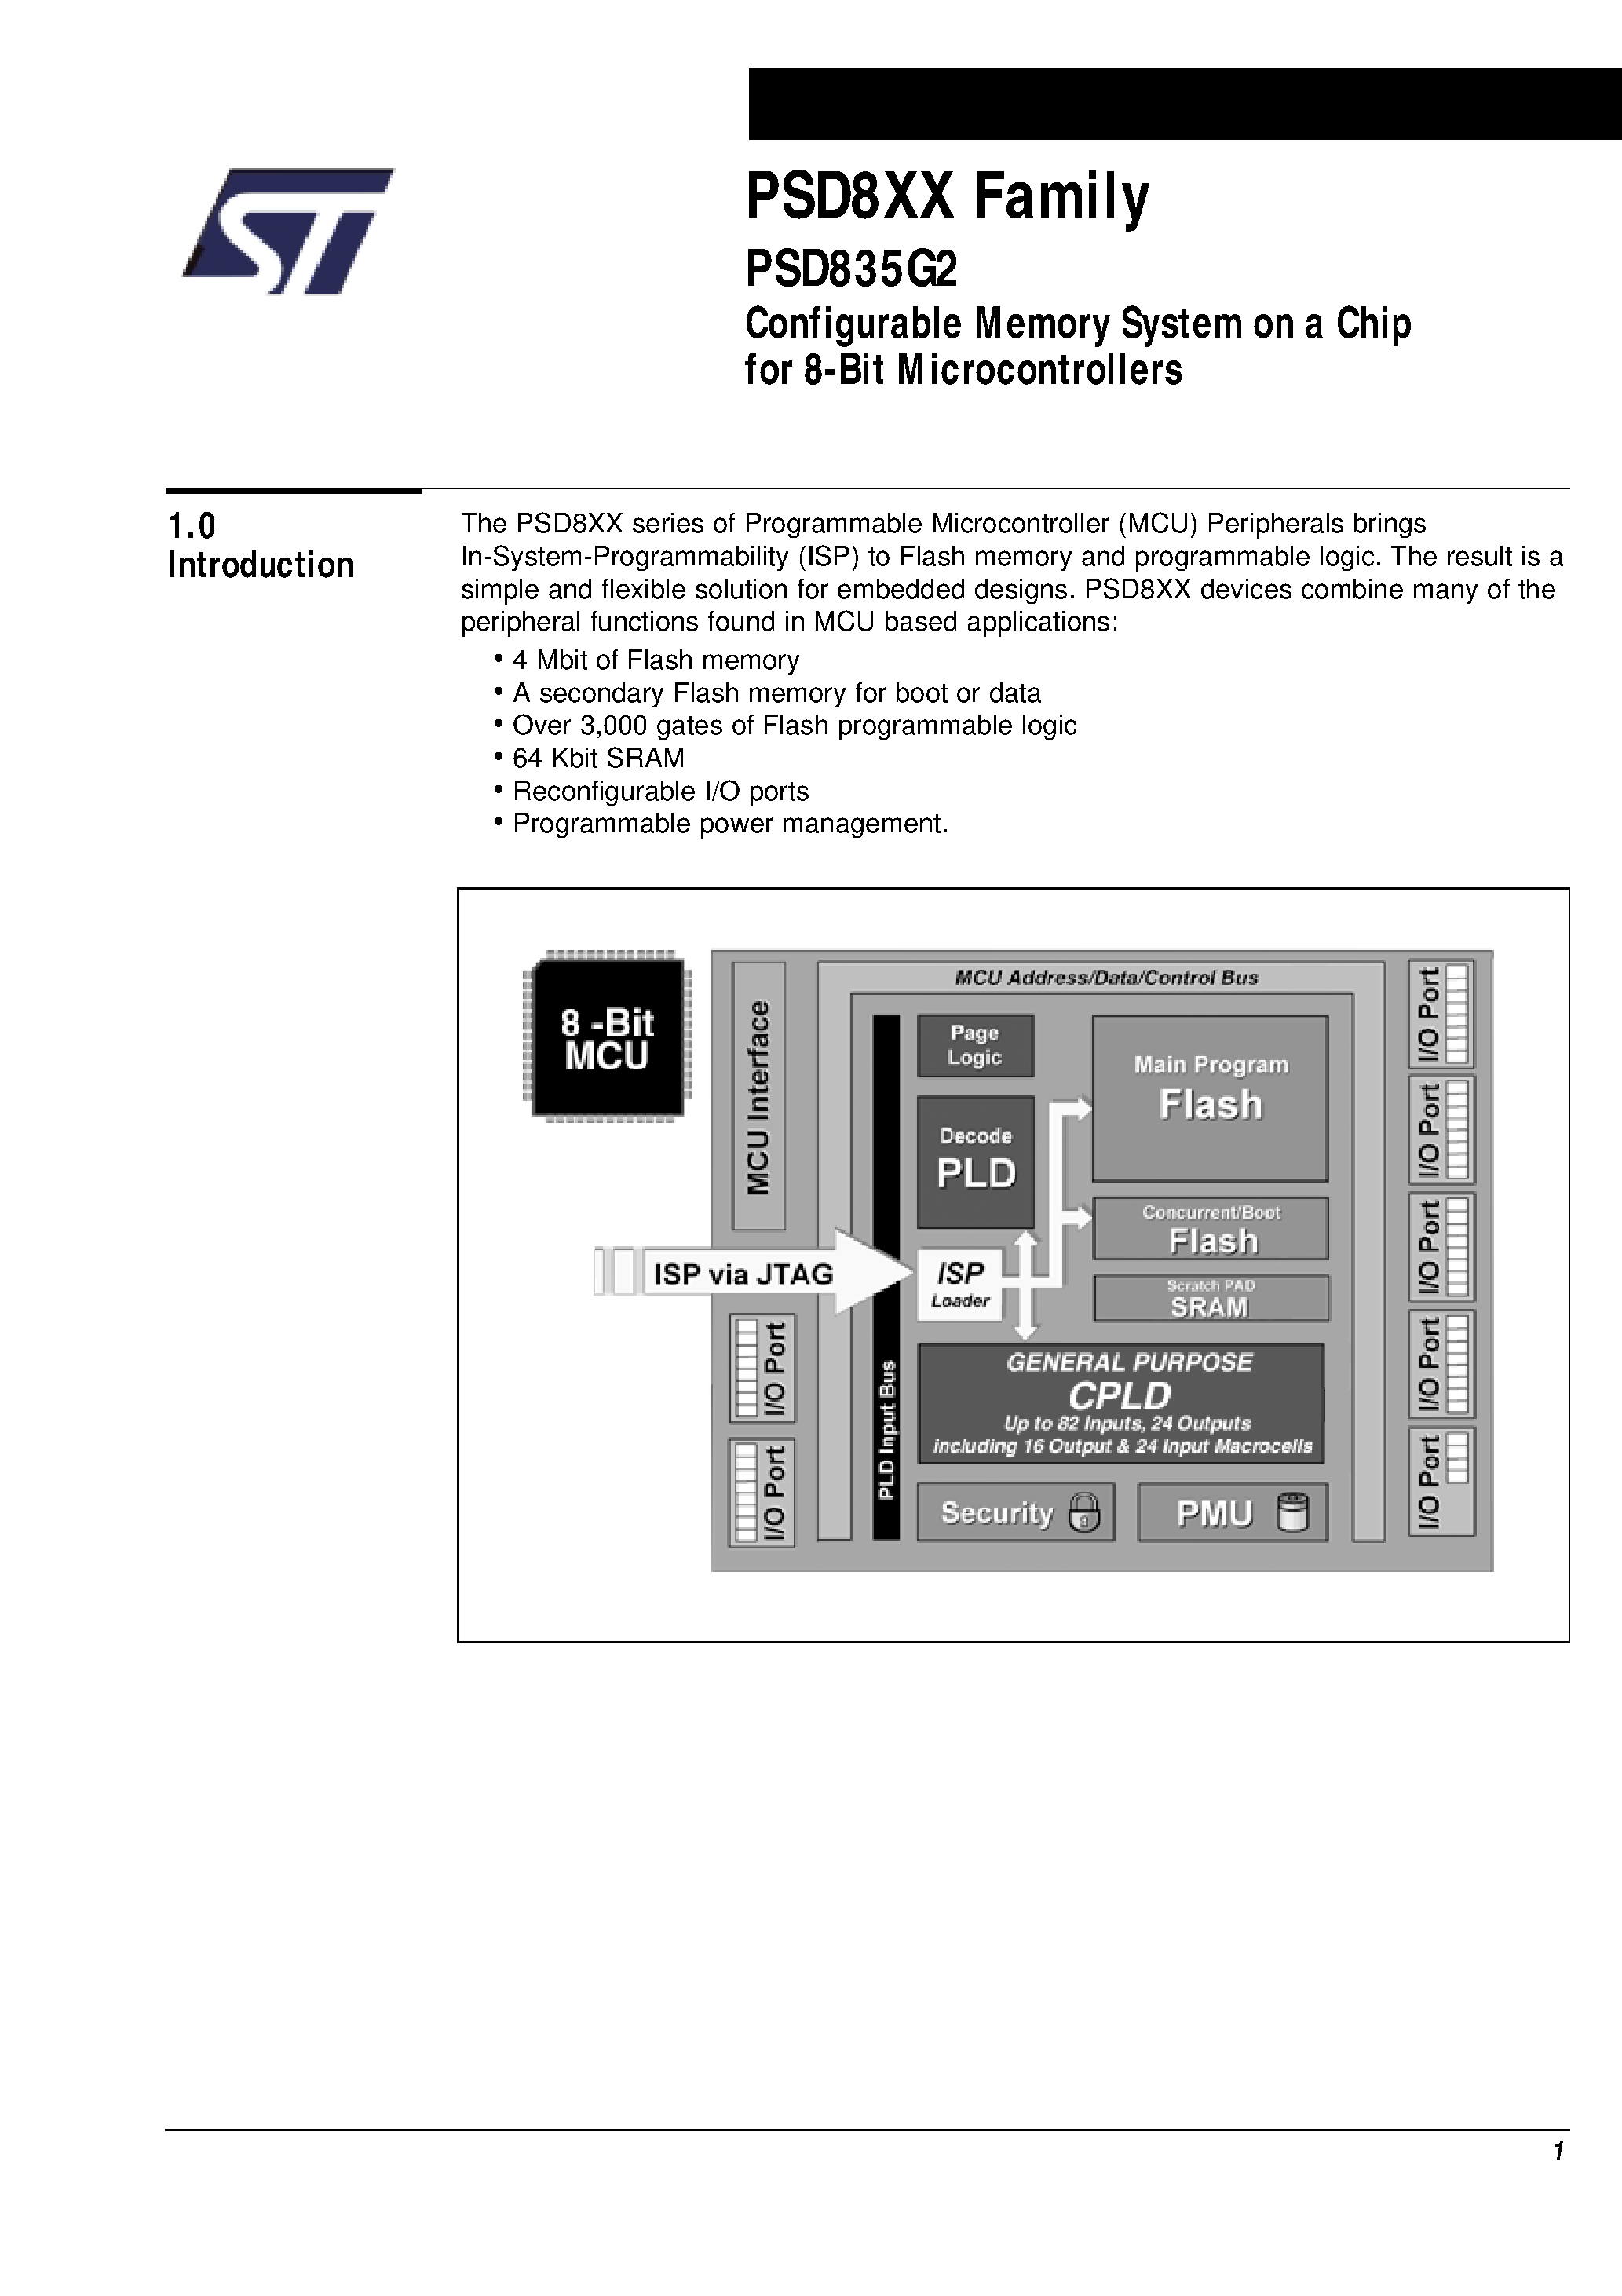 Datasheet PSD835F1V-A-12B81 - Configurable Memory System on a Chip for 8-Bit Microcontrollers page 2